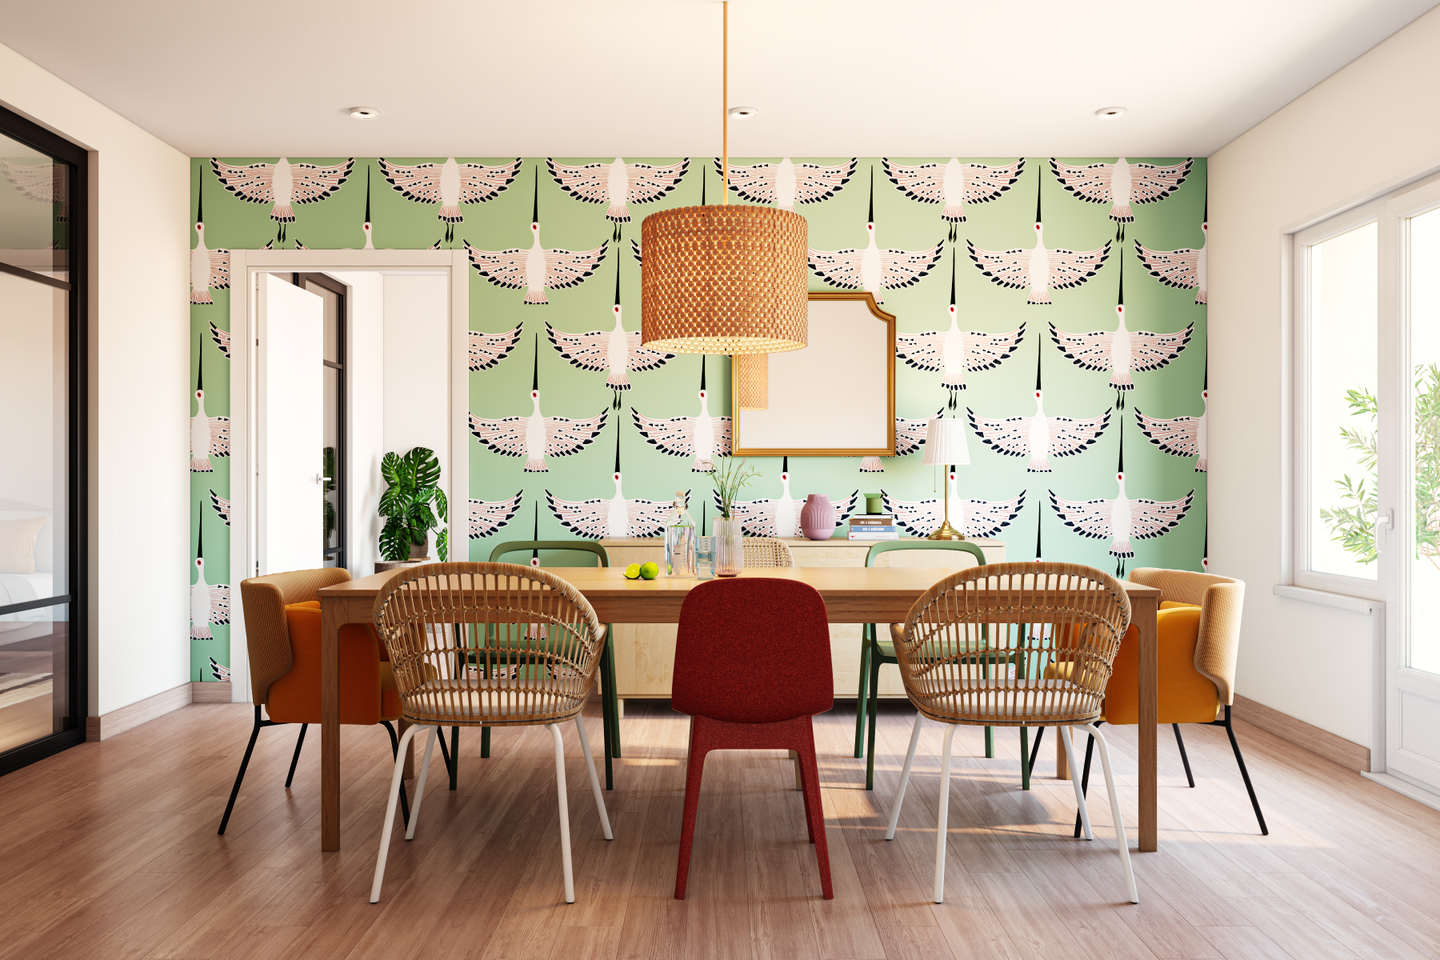 Eclectic Dining Room Design - Livspace